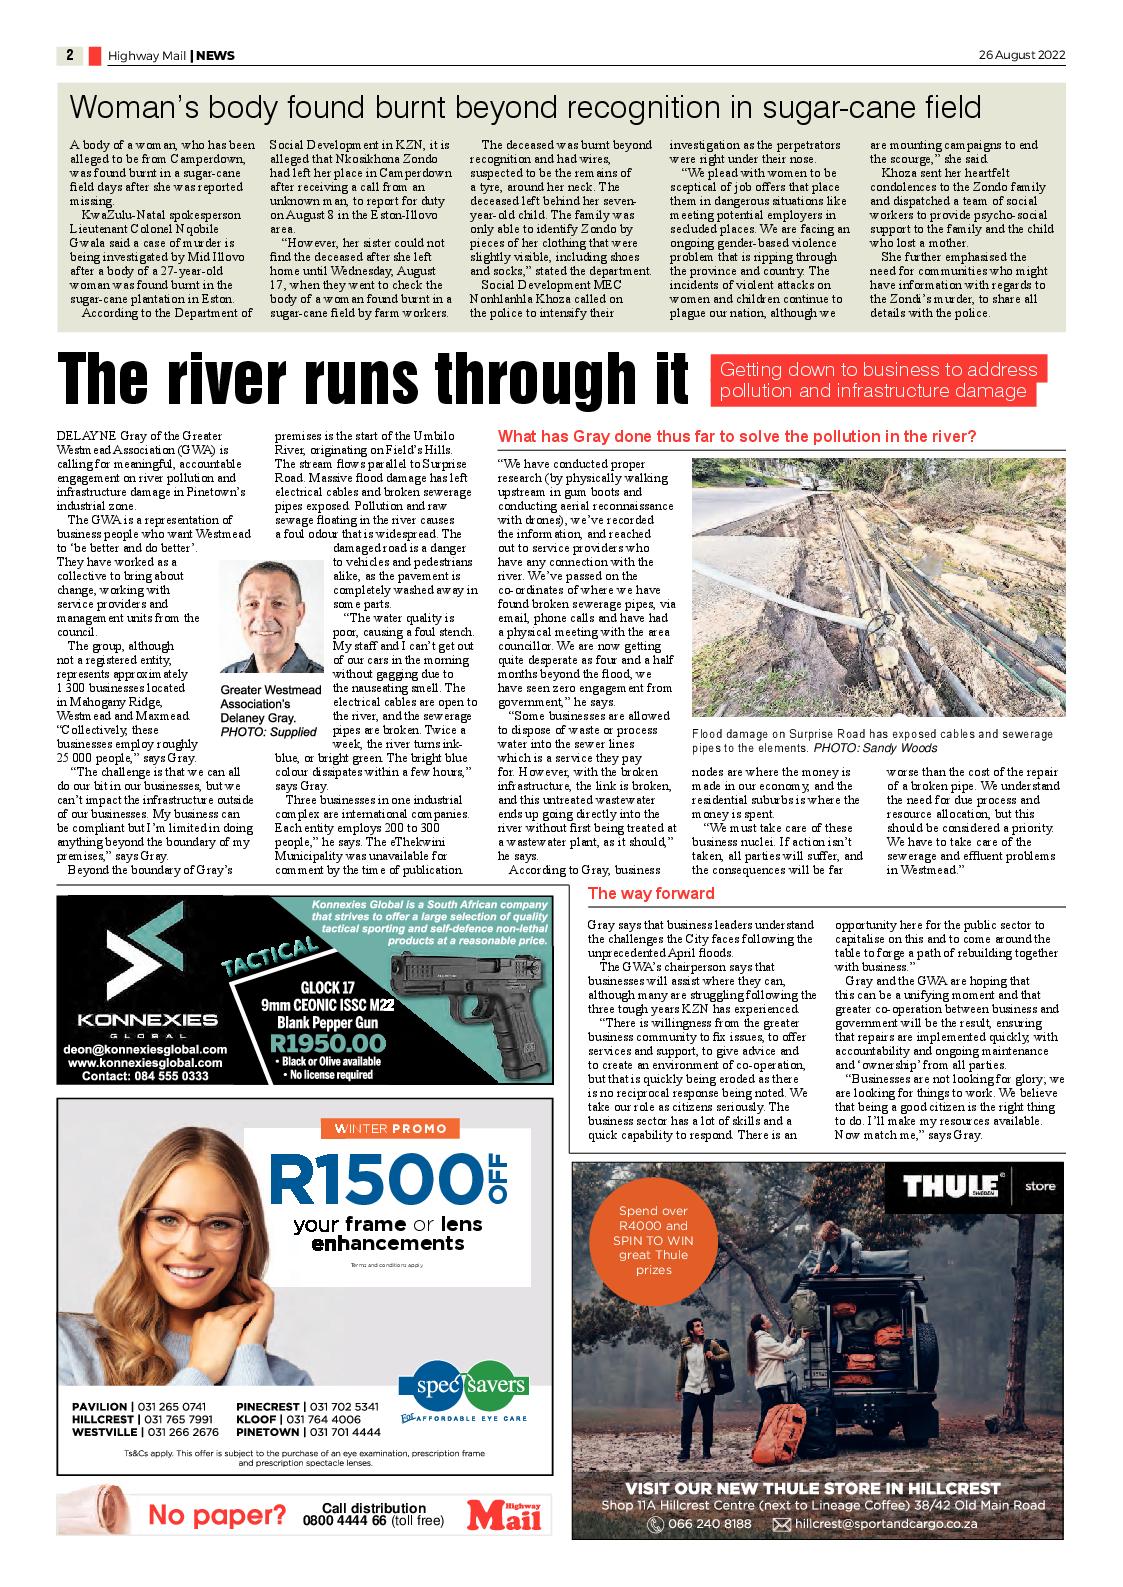 Highway Mail 26 August 2022 page 2